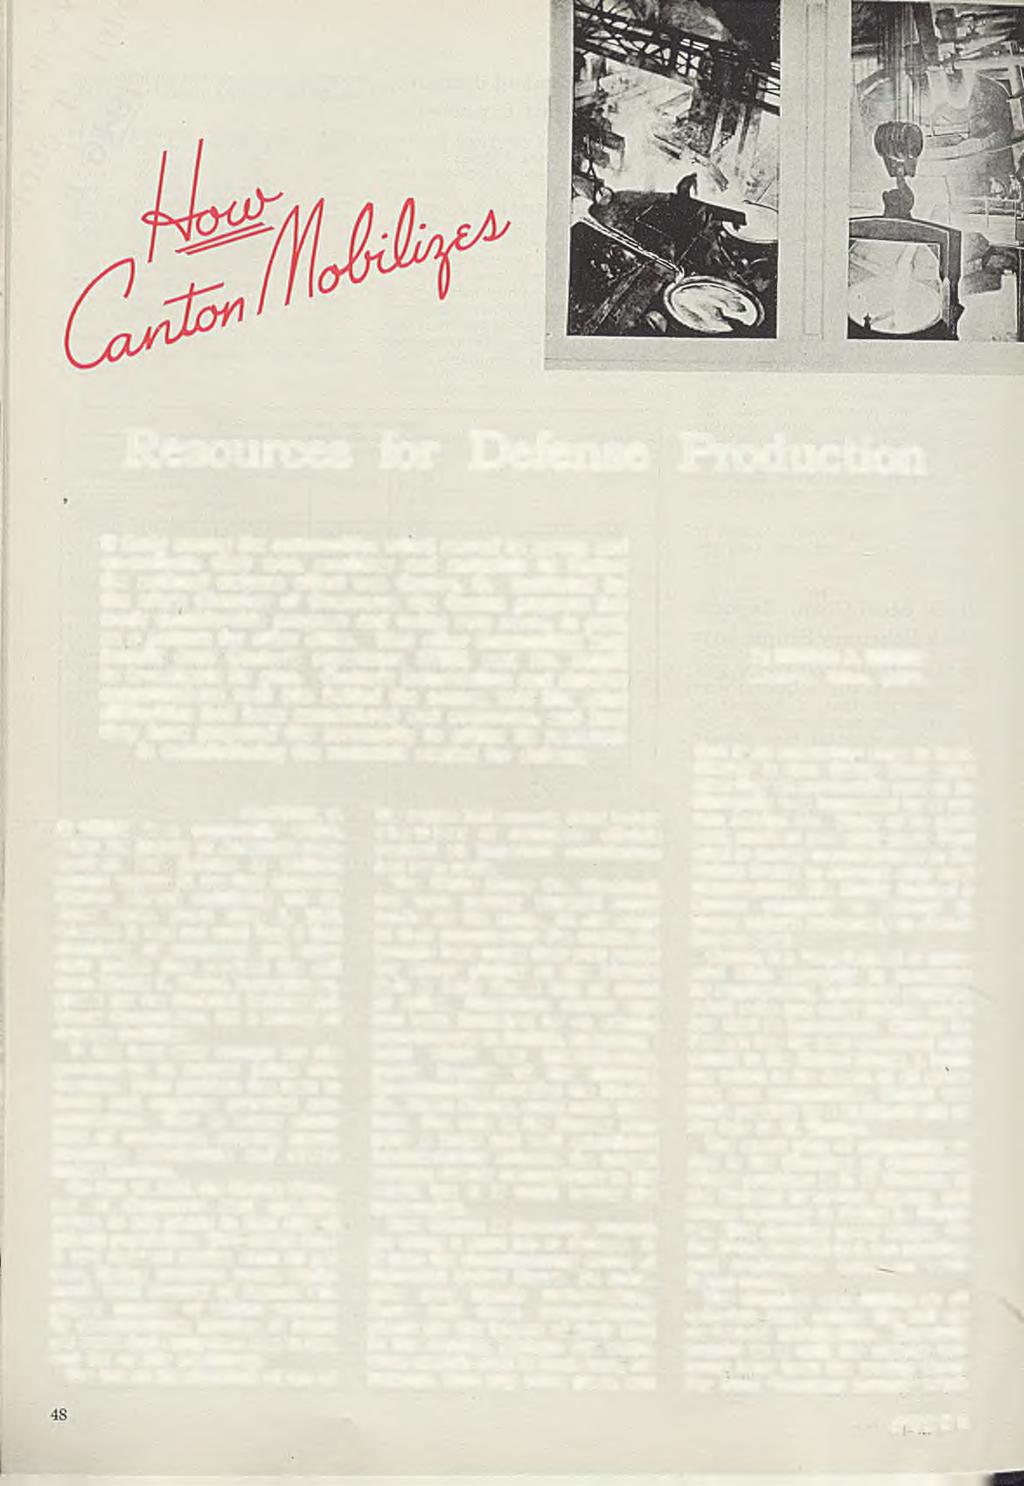 Resources for Defense Production Early among the communities which moyed to survey and co-ordinate their men, machines and materials to further the national defense effort was Canton, O.